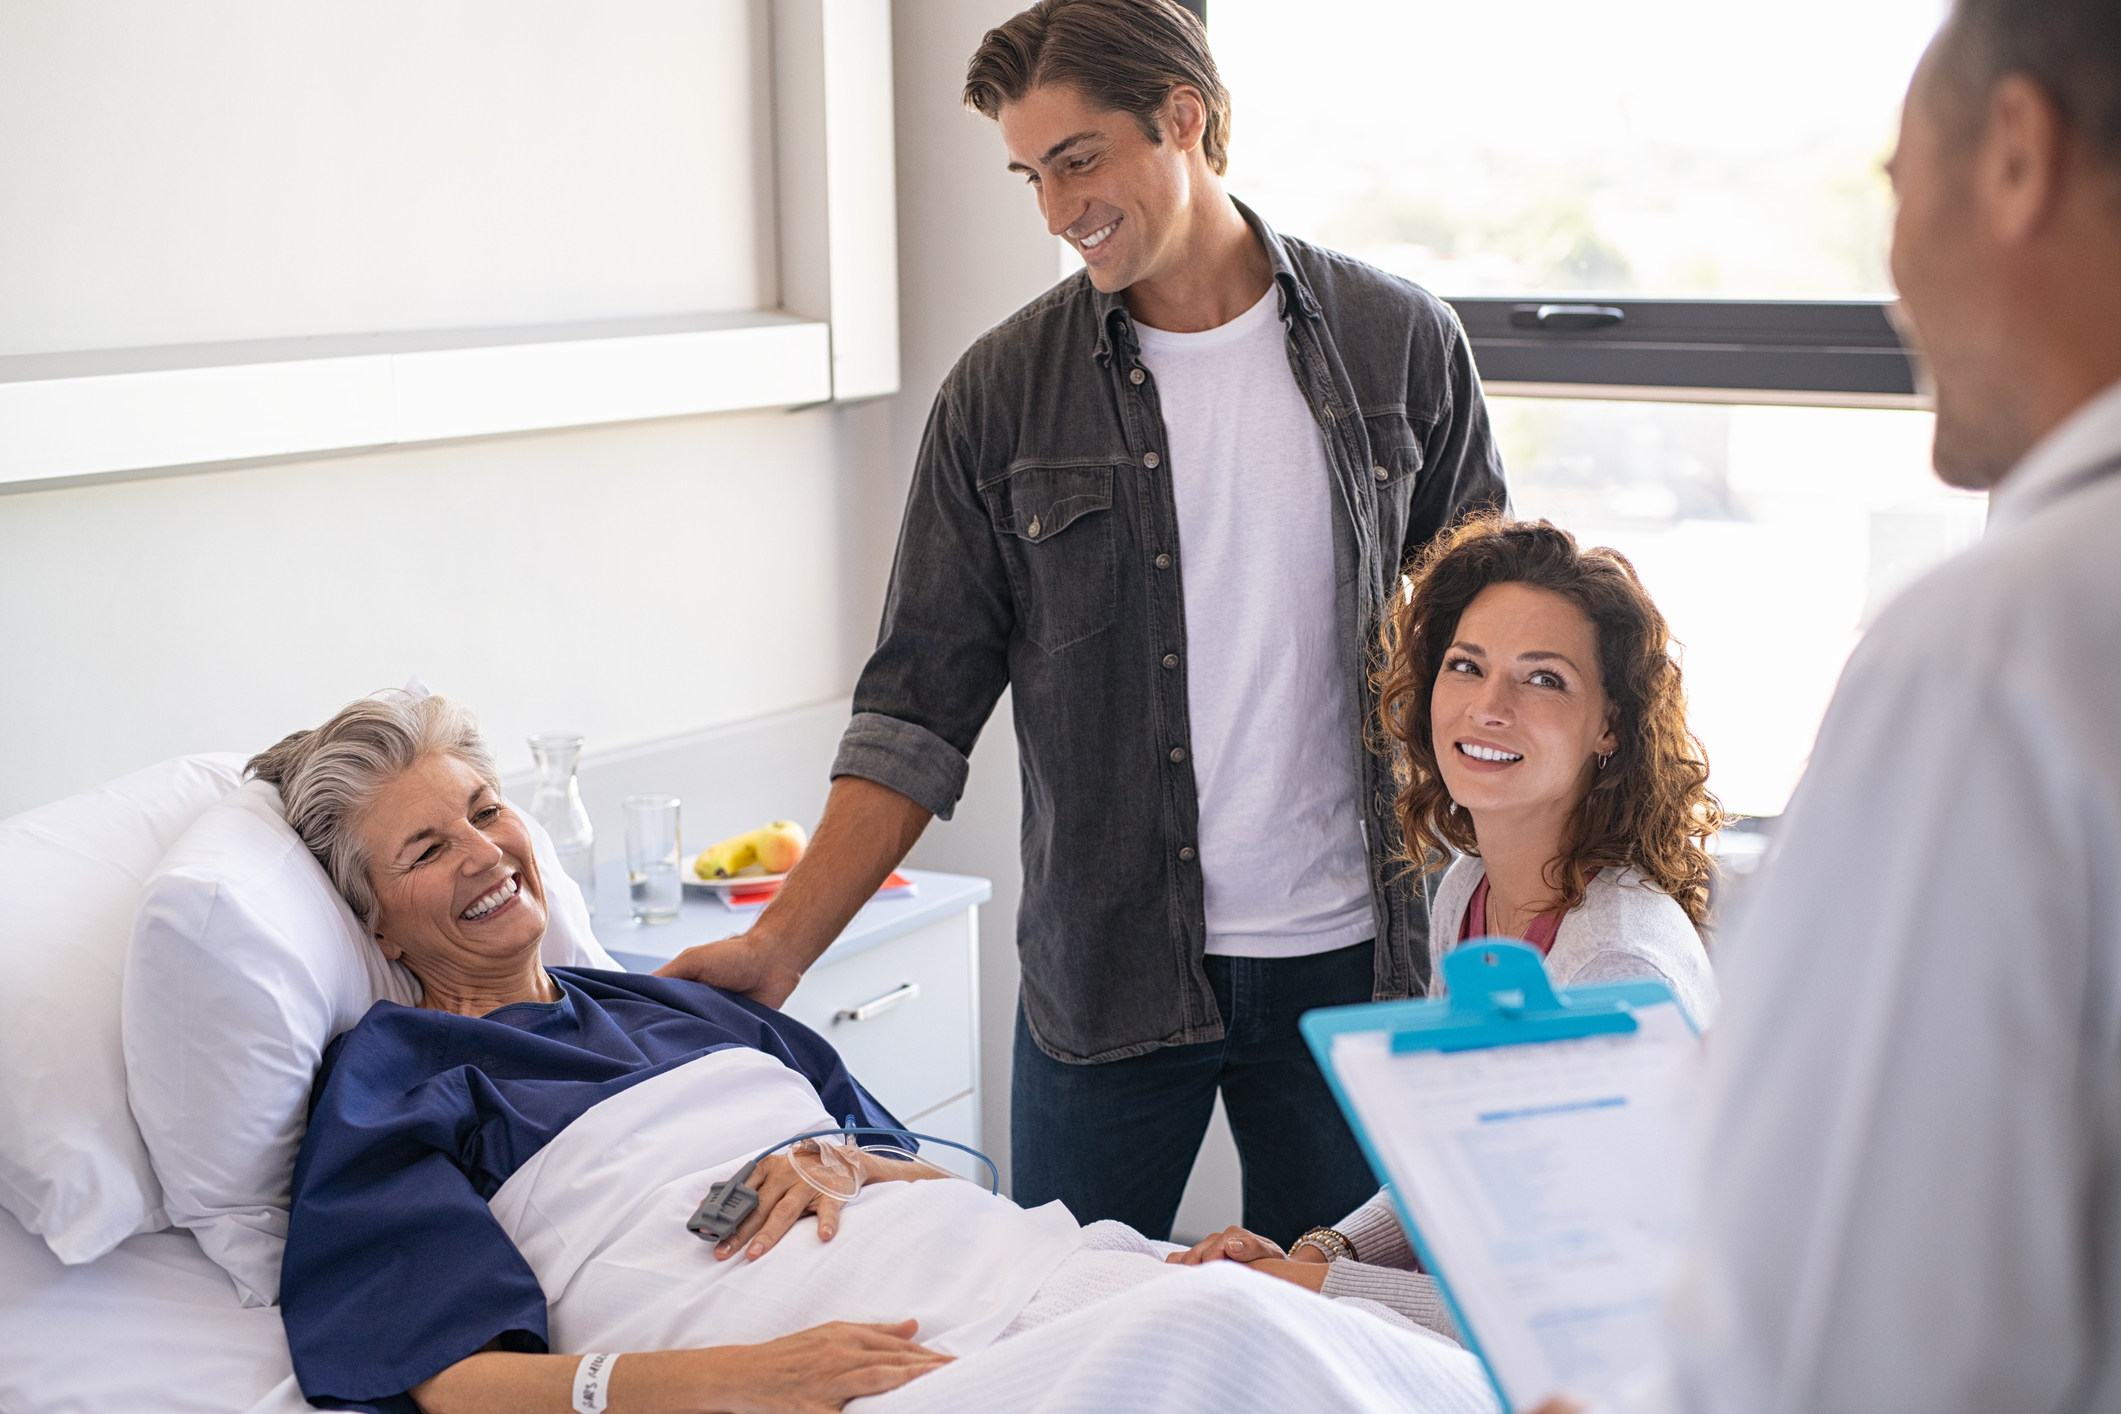 Doctor holding clipboard talking to family and smiling patient. Happy senior woman lying on hospital bed with lovely son and daughter visiting and talking to doctor. Professional friendly physician gives the results of the medical report to patient's family members.